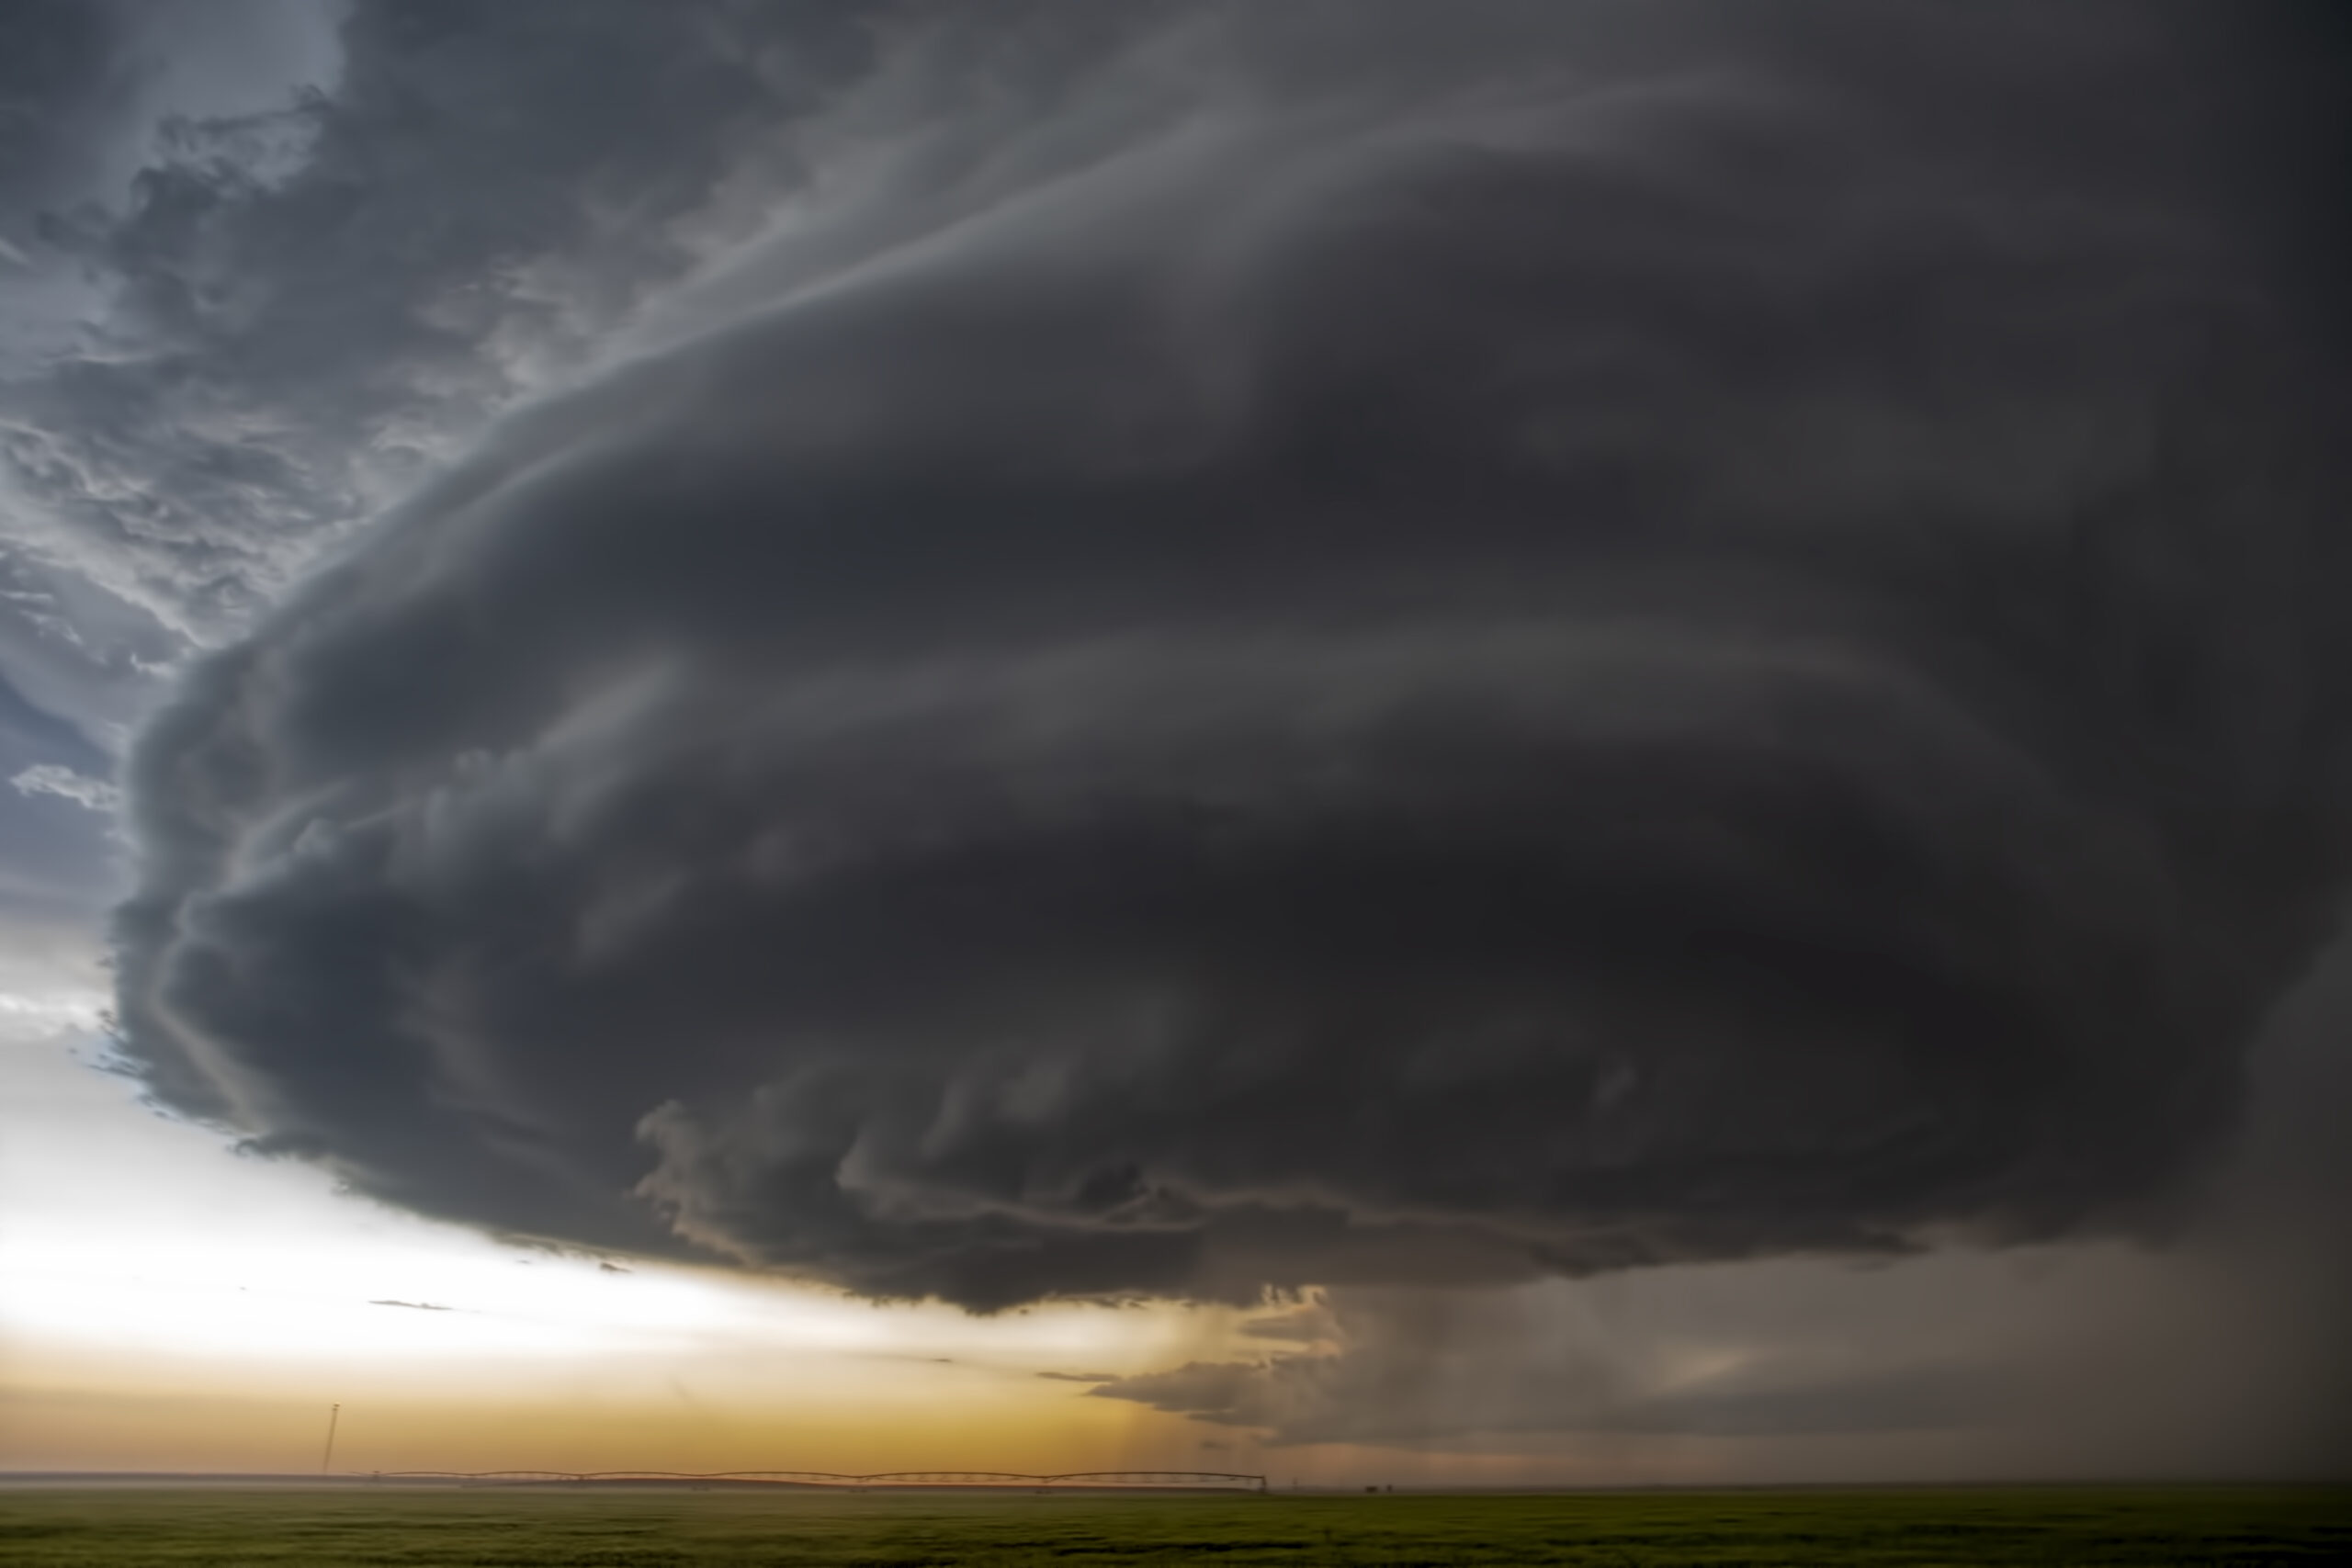 A supercell thunderstorm develops across Haskell County Kansas